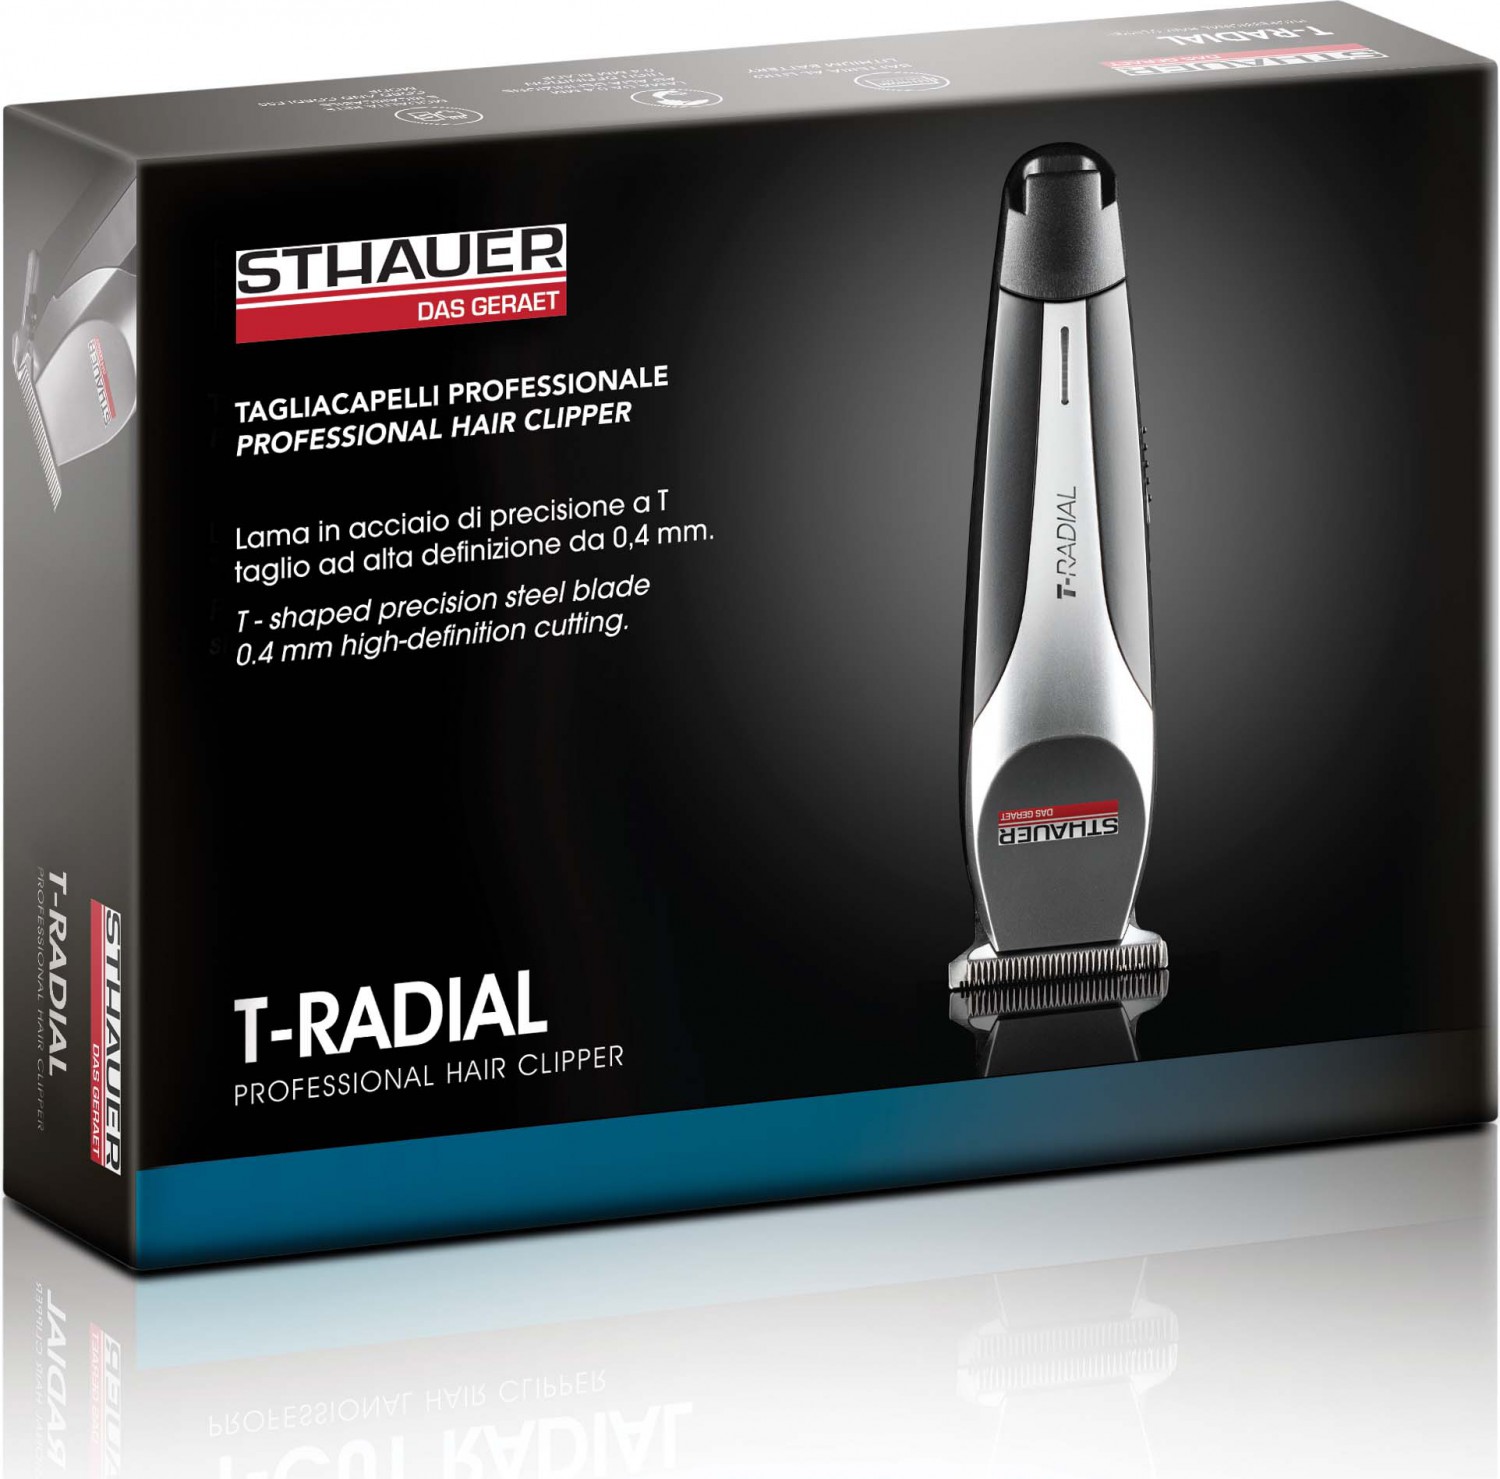  XanitaliaPro T-Radial from Sthauer 